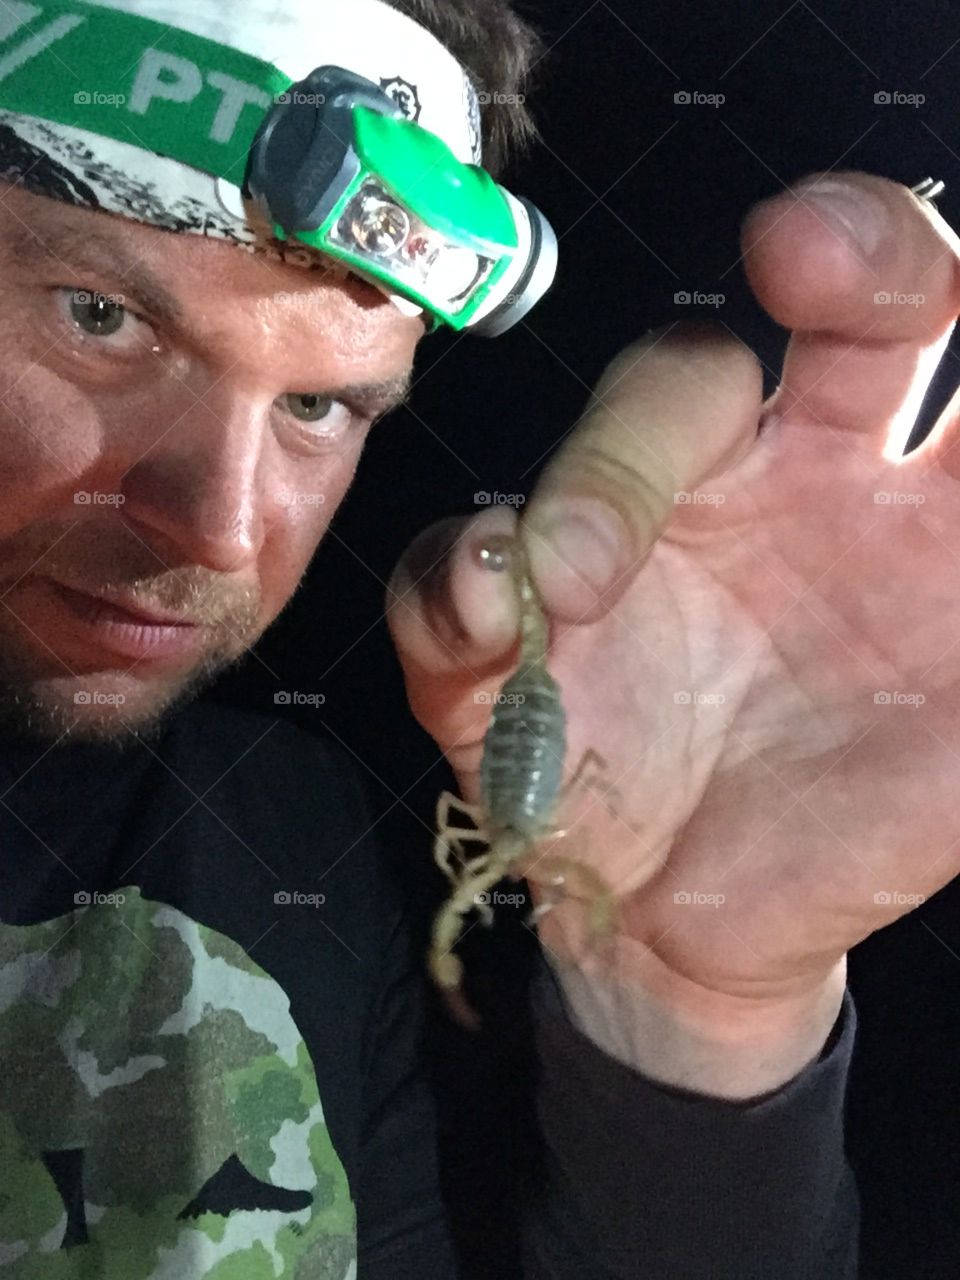 We found 15 scorpions at our campsite